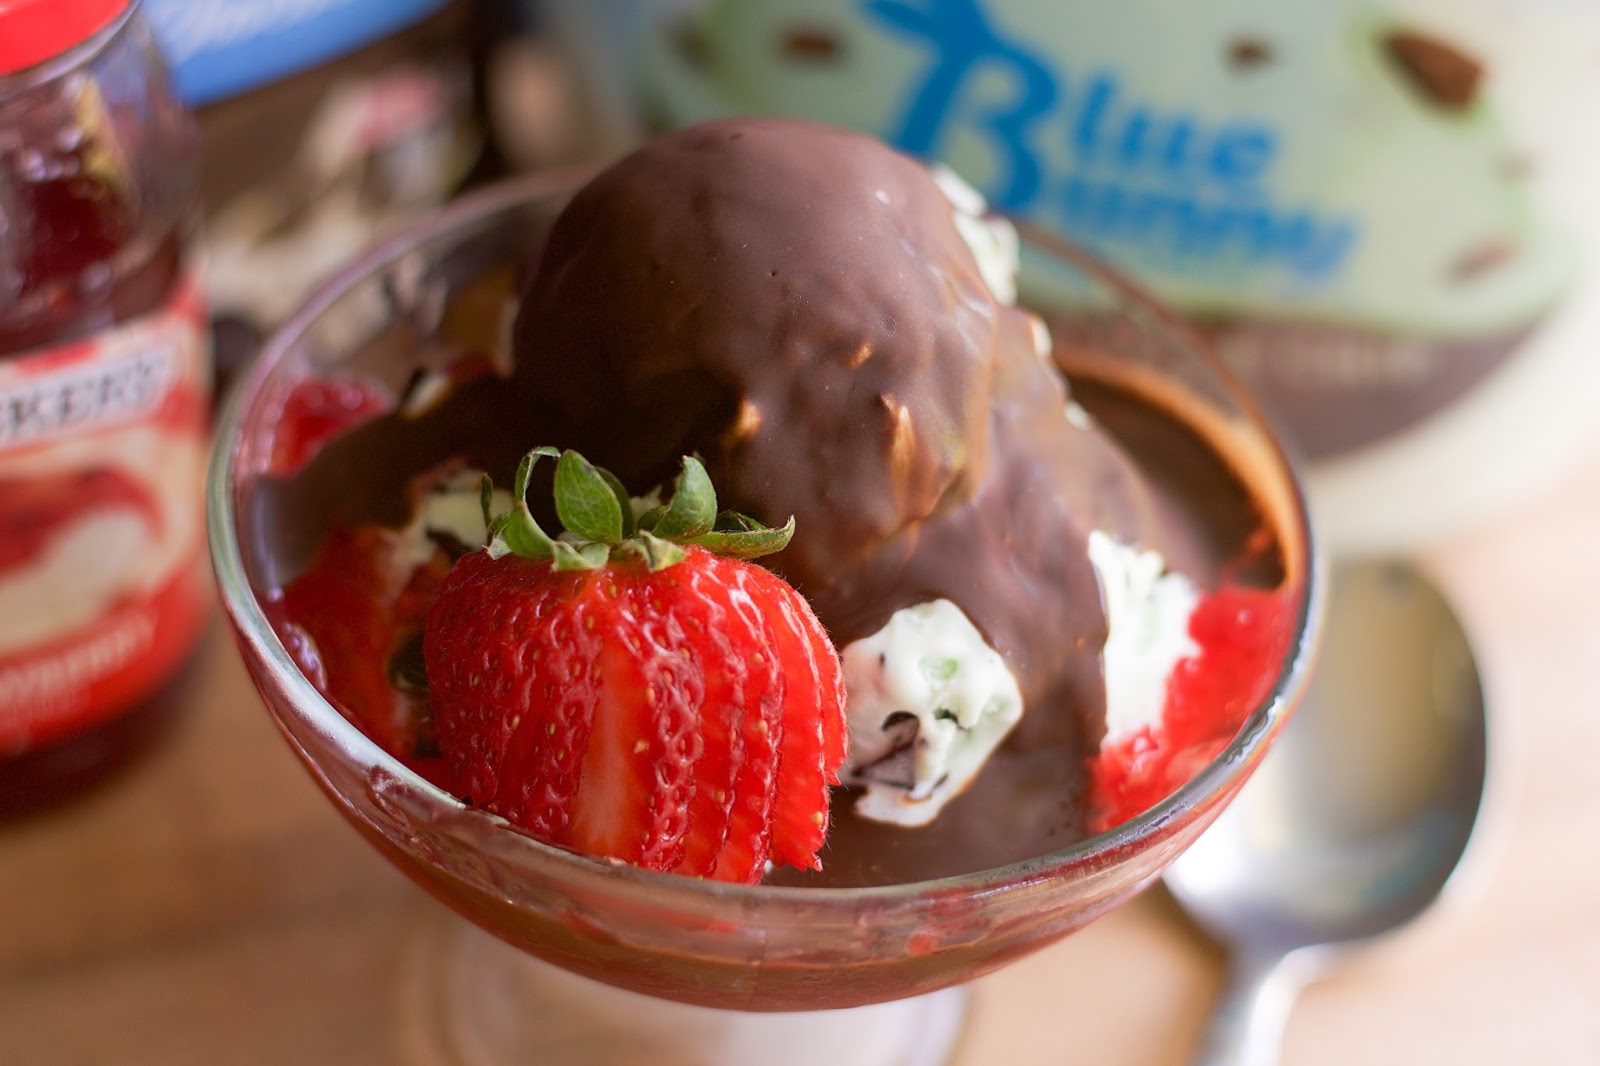 Mint Chocolate Covered Strawberry Sundae - The Kitchen Wife